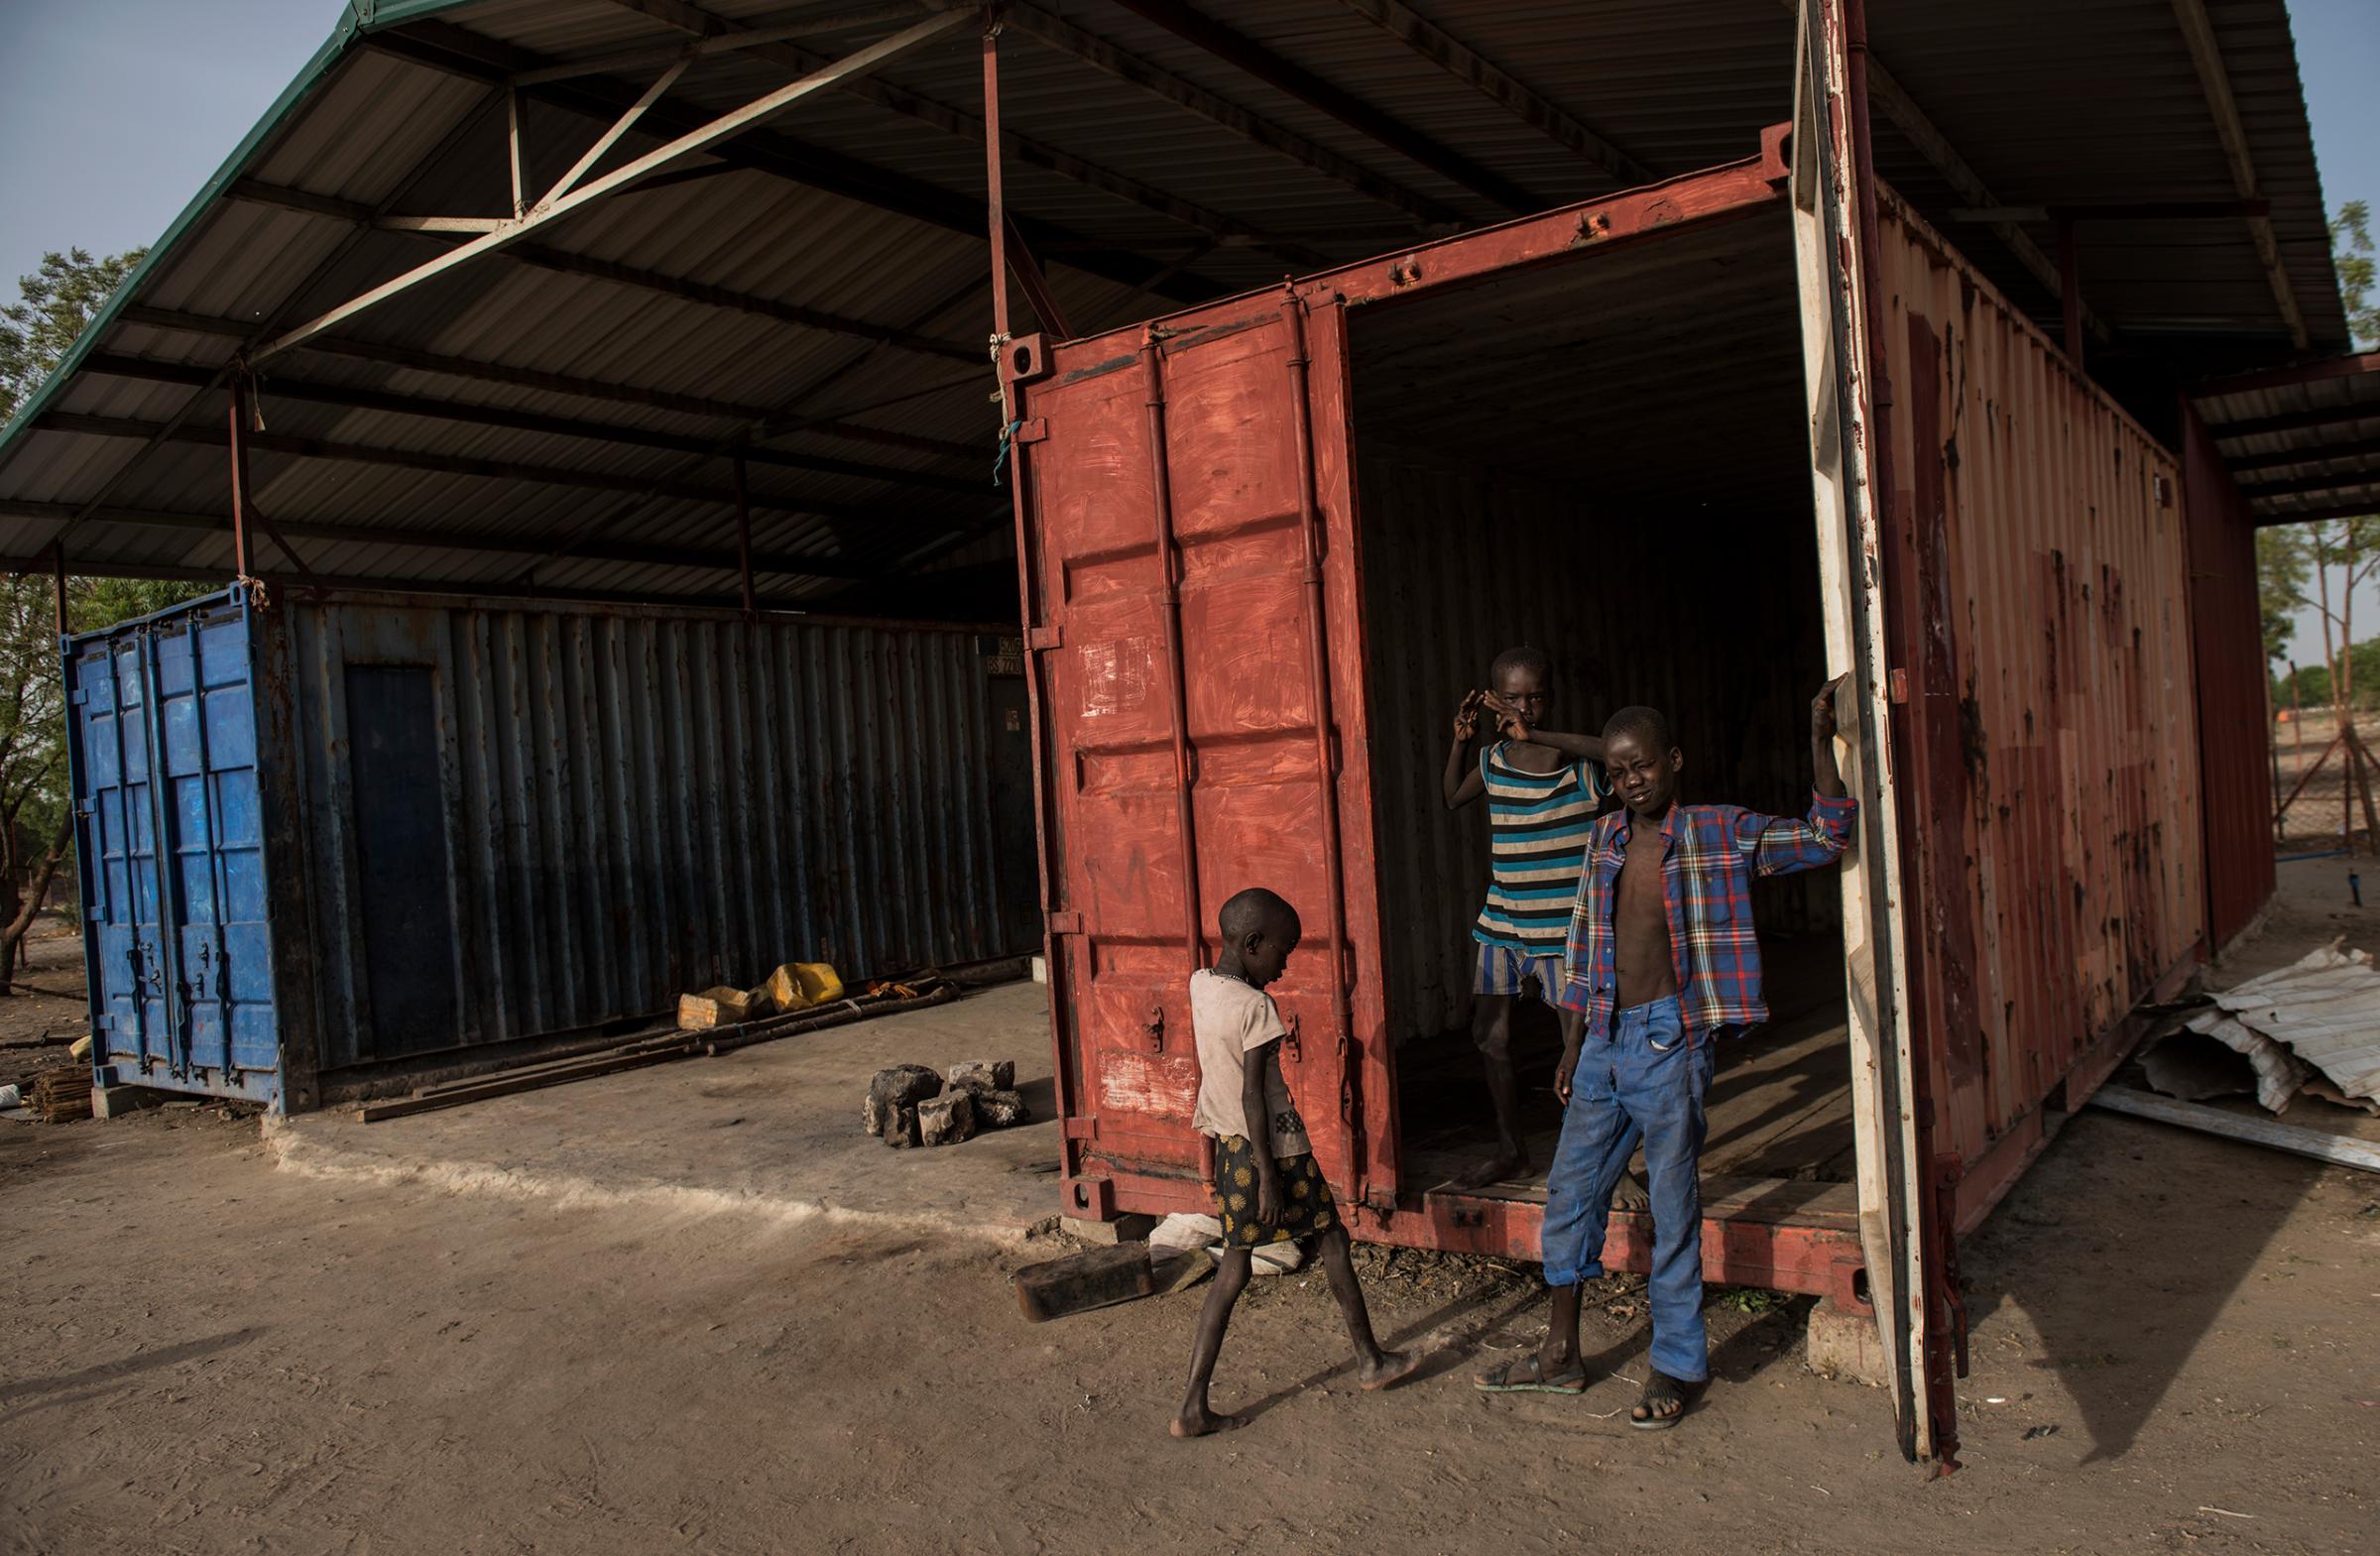 South Sudanese children play on March 20, 2016, in the containers on the church compound where, in October 2015, more than 50 men were locked inside a container and died. One 13-year-old boy survived.